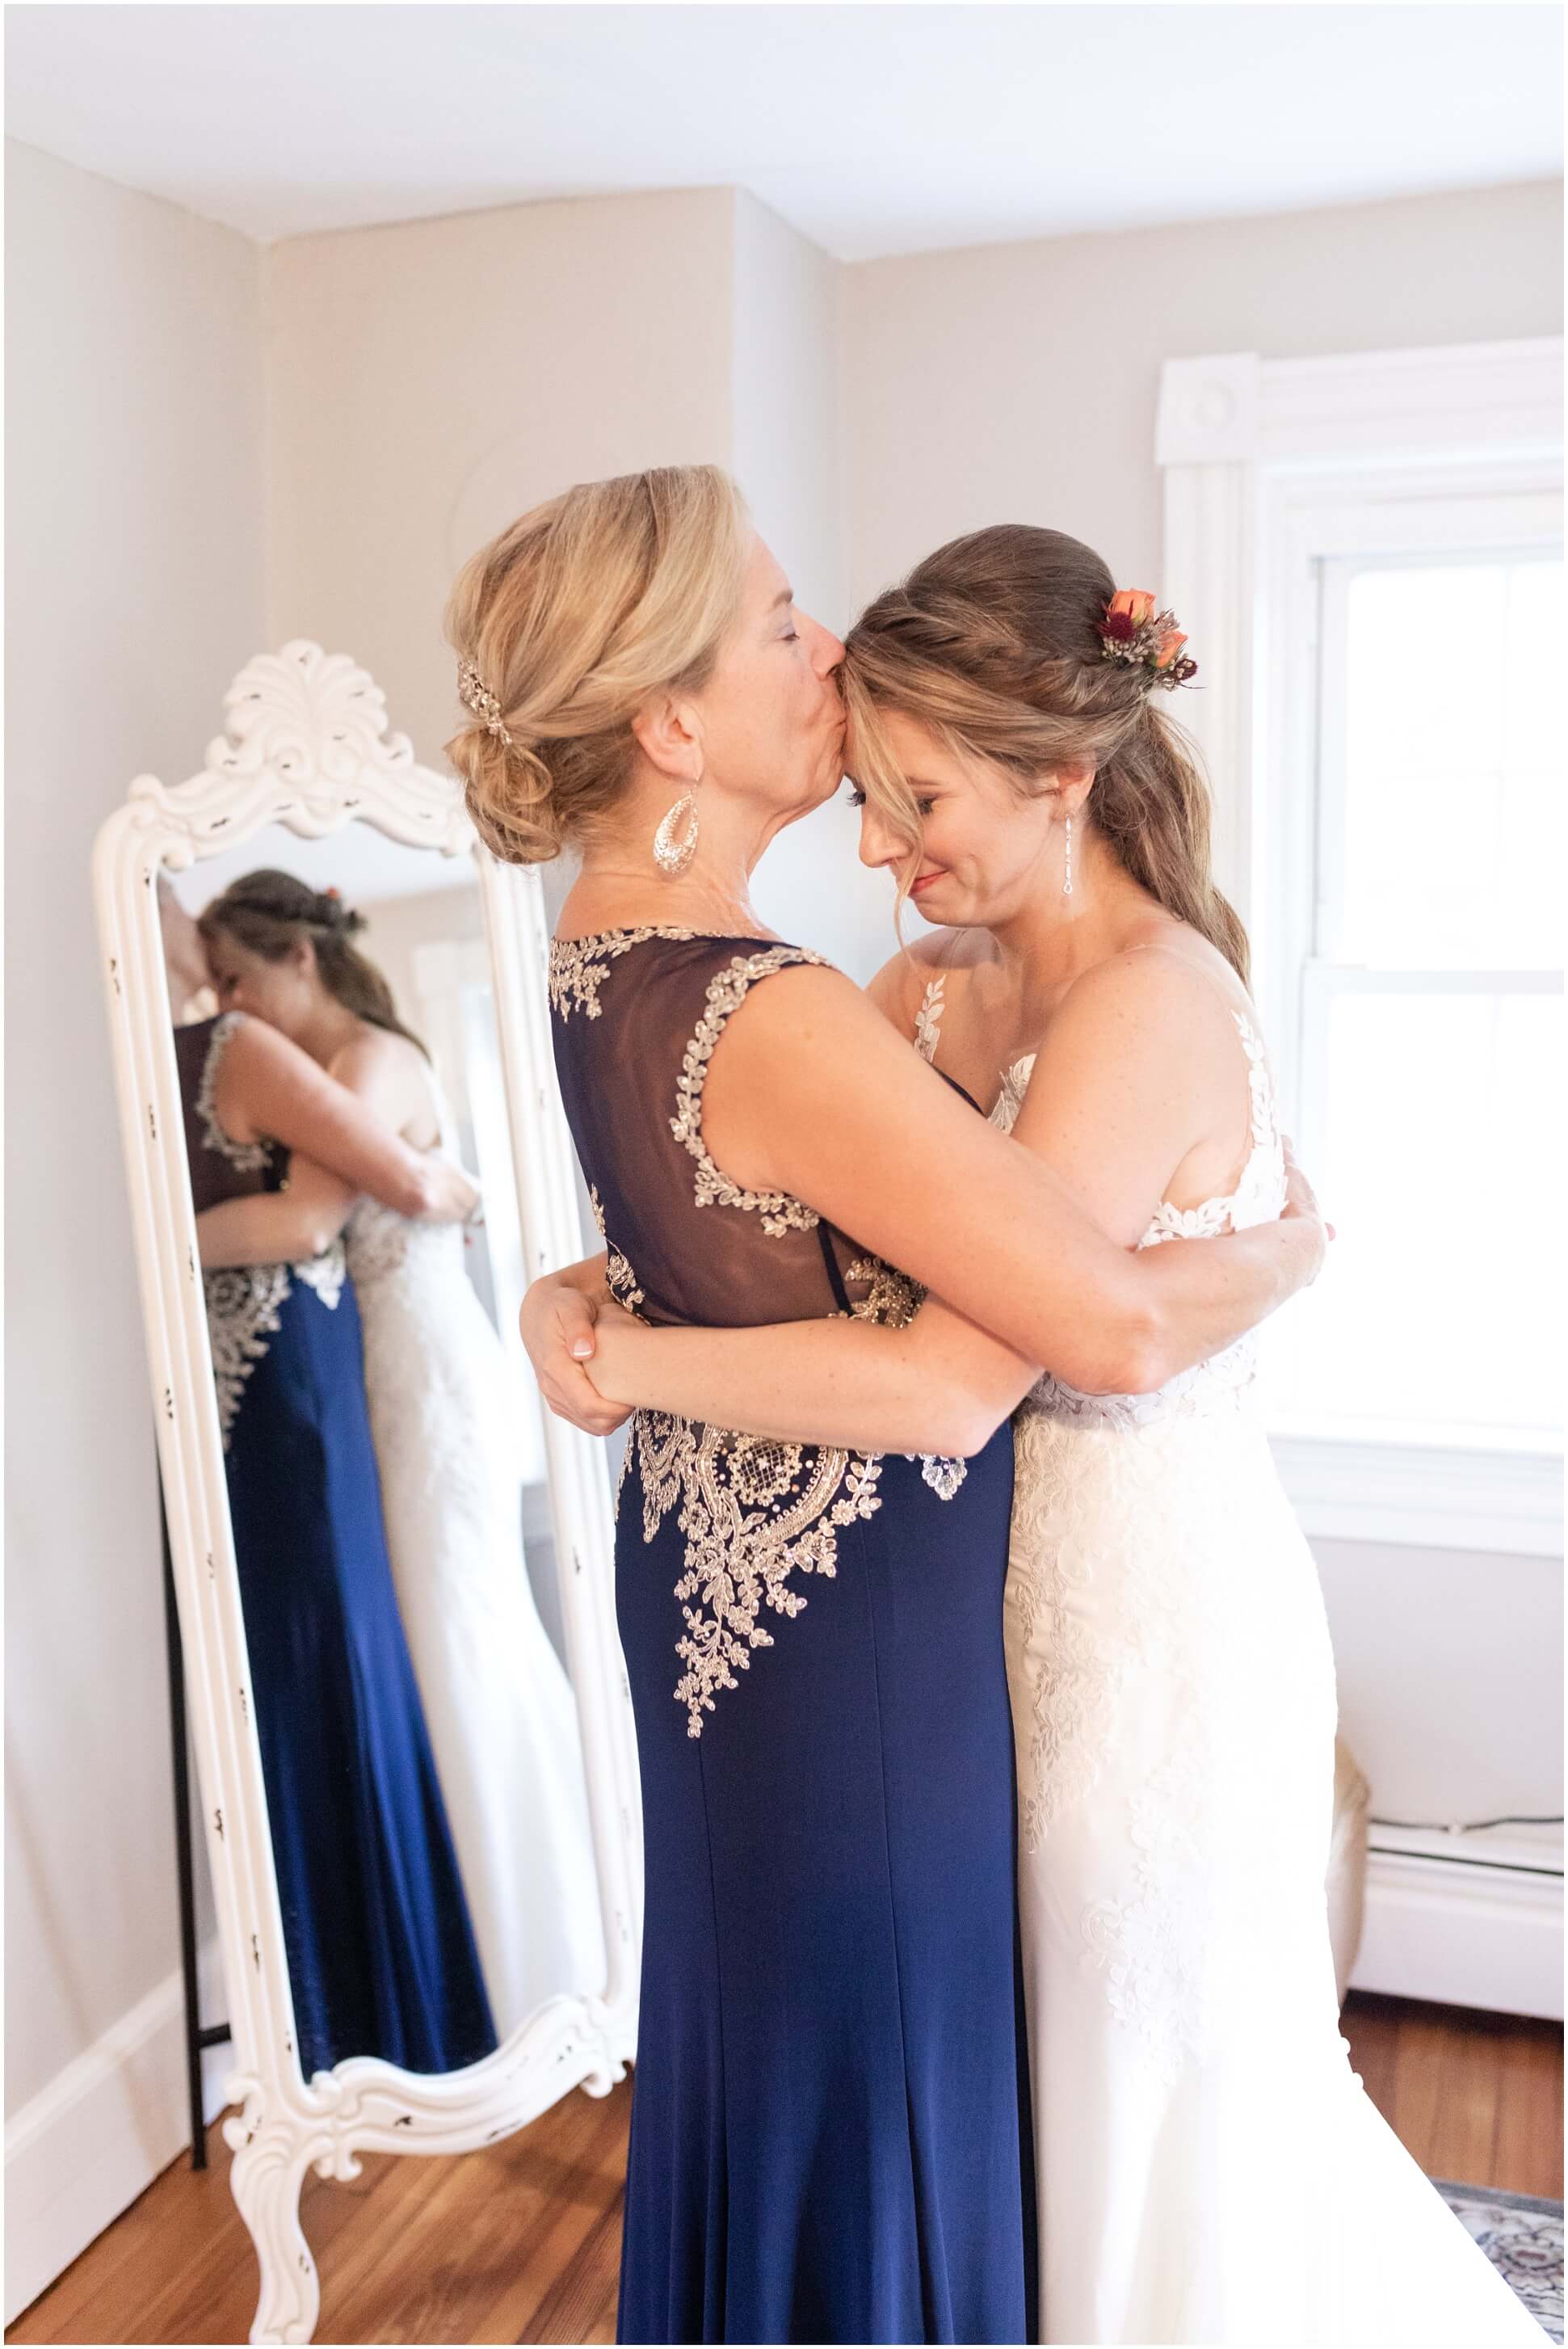 MOTHER OF THE BRIDE KISSING BRIDE ON THE FOREHEAD IN THE BRIDAL SUITE